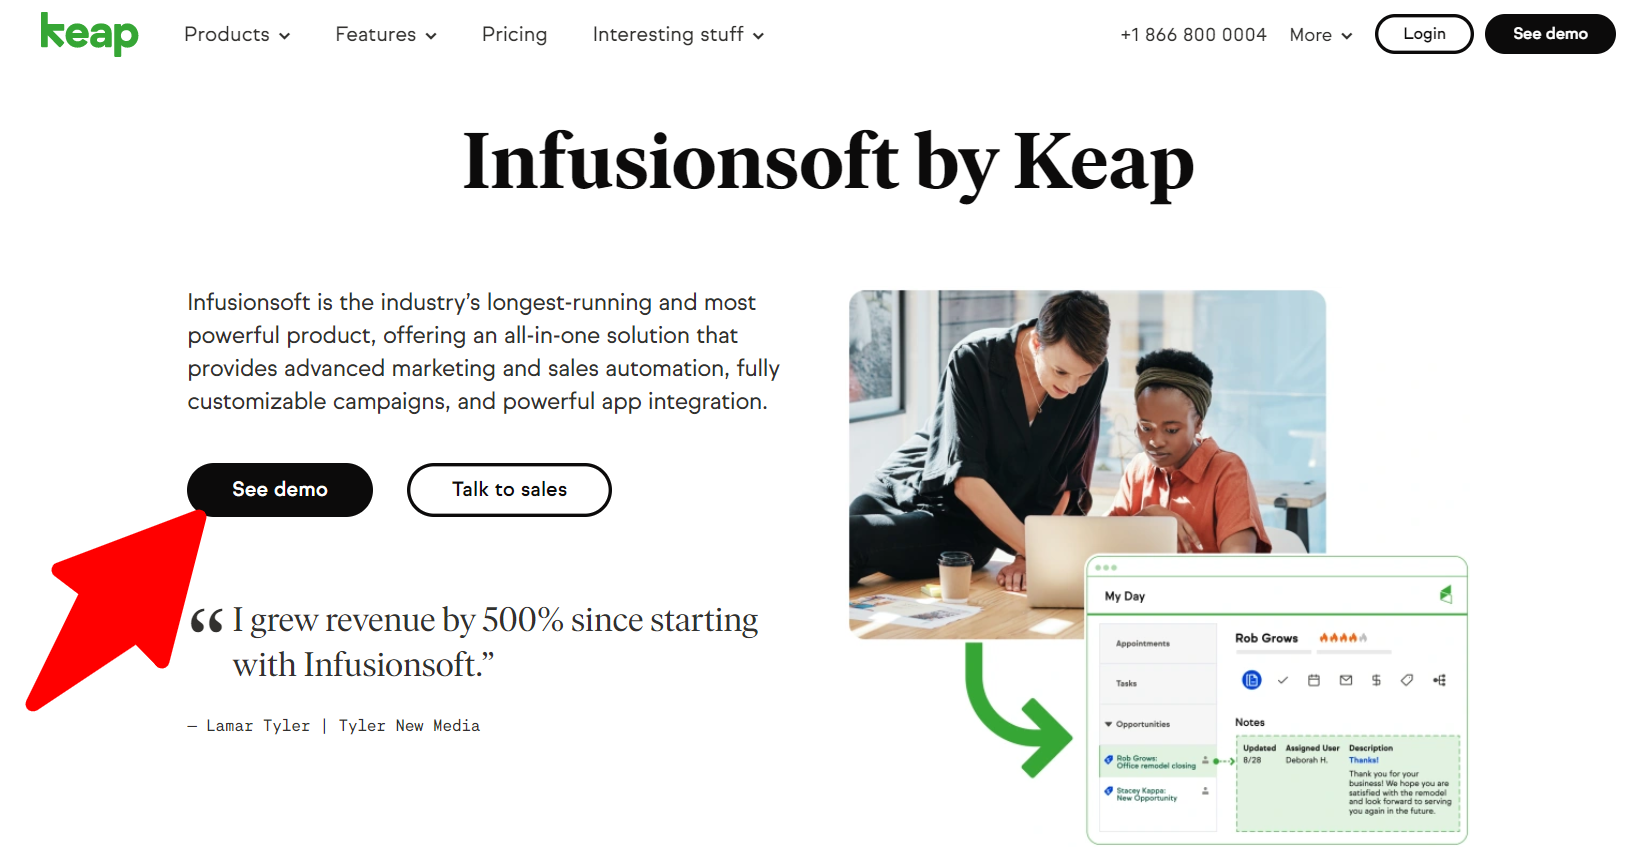 Infusionsoft Overview